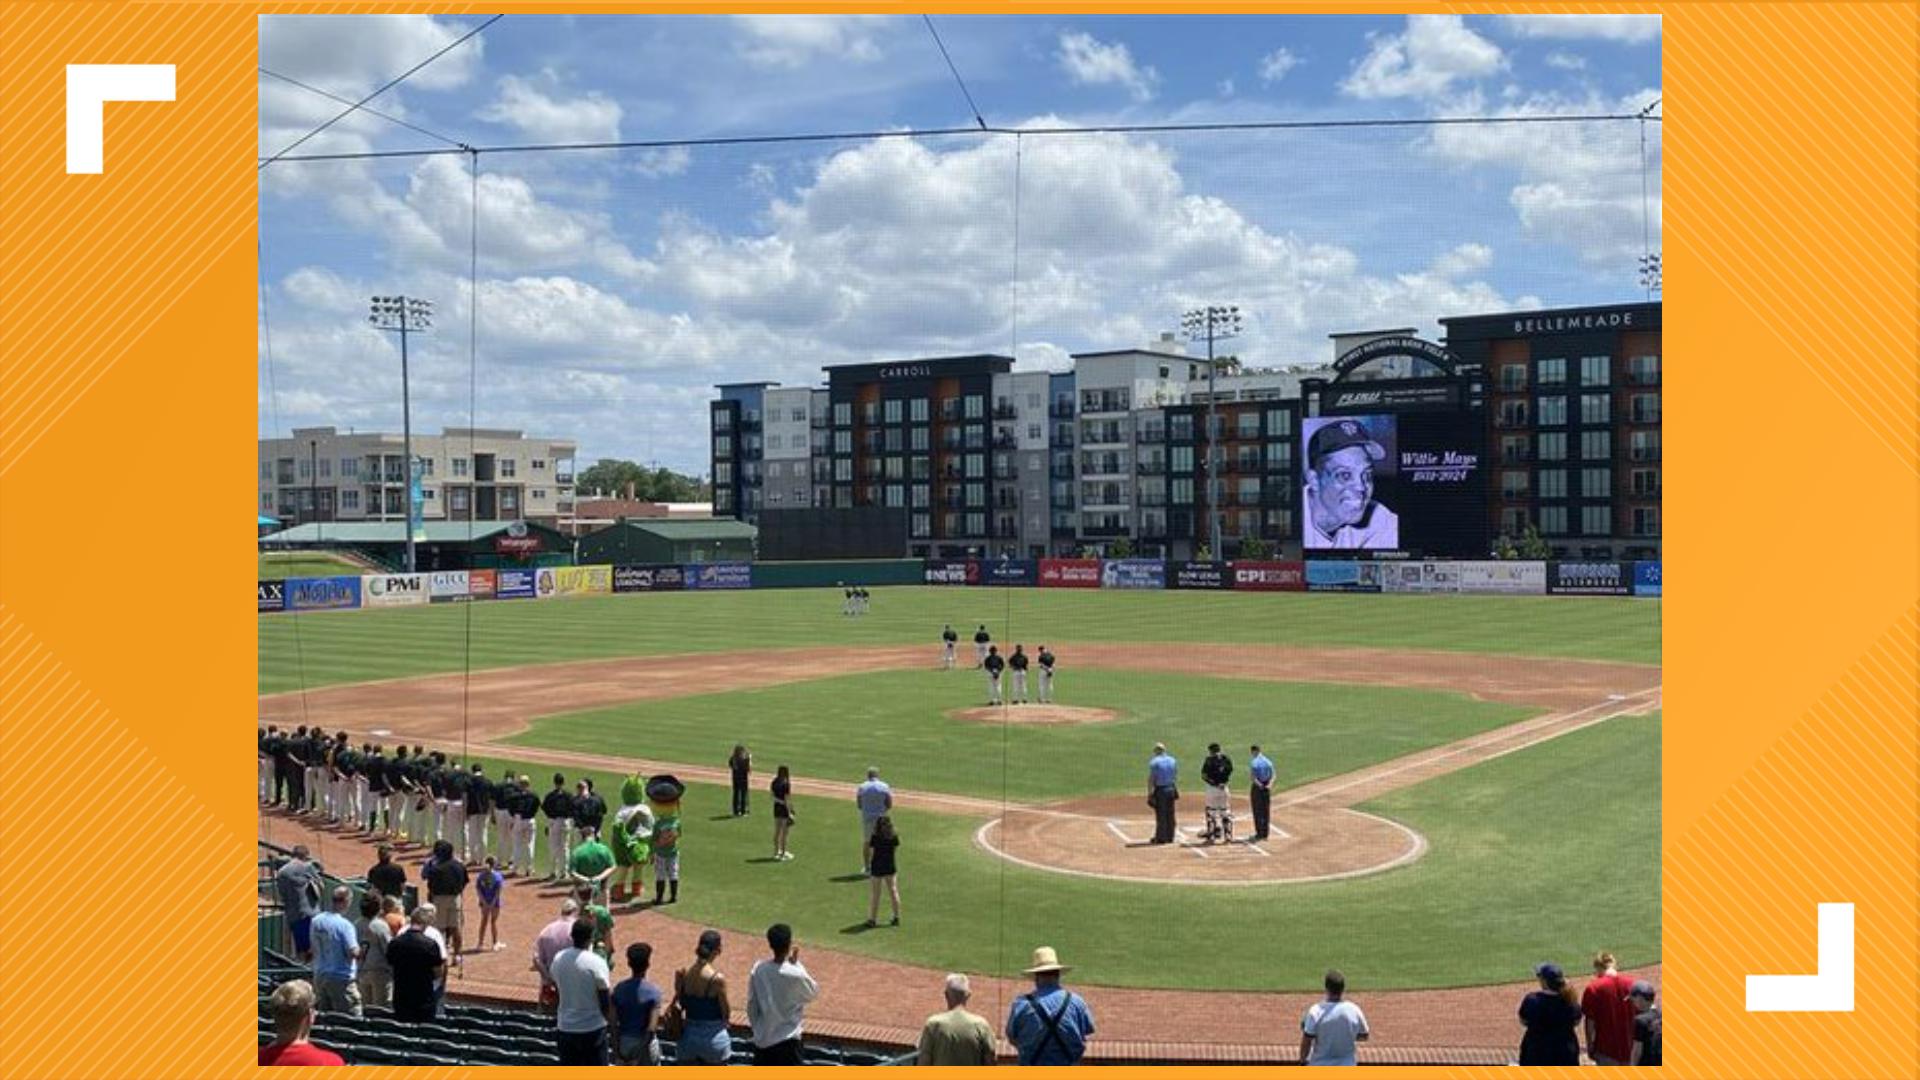 The Greensboro Grasshoppers held a moment of silence for MLB legend Willie Mays